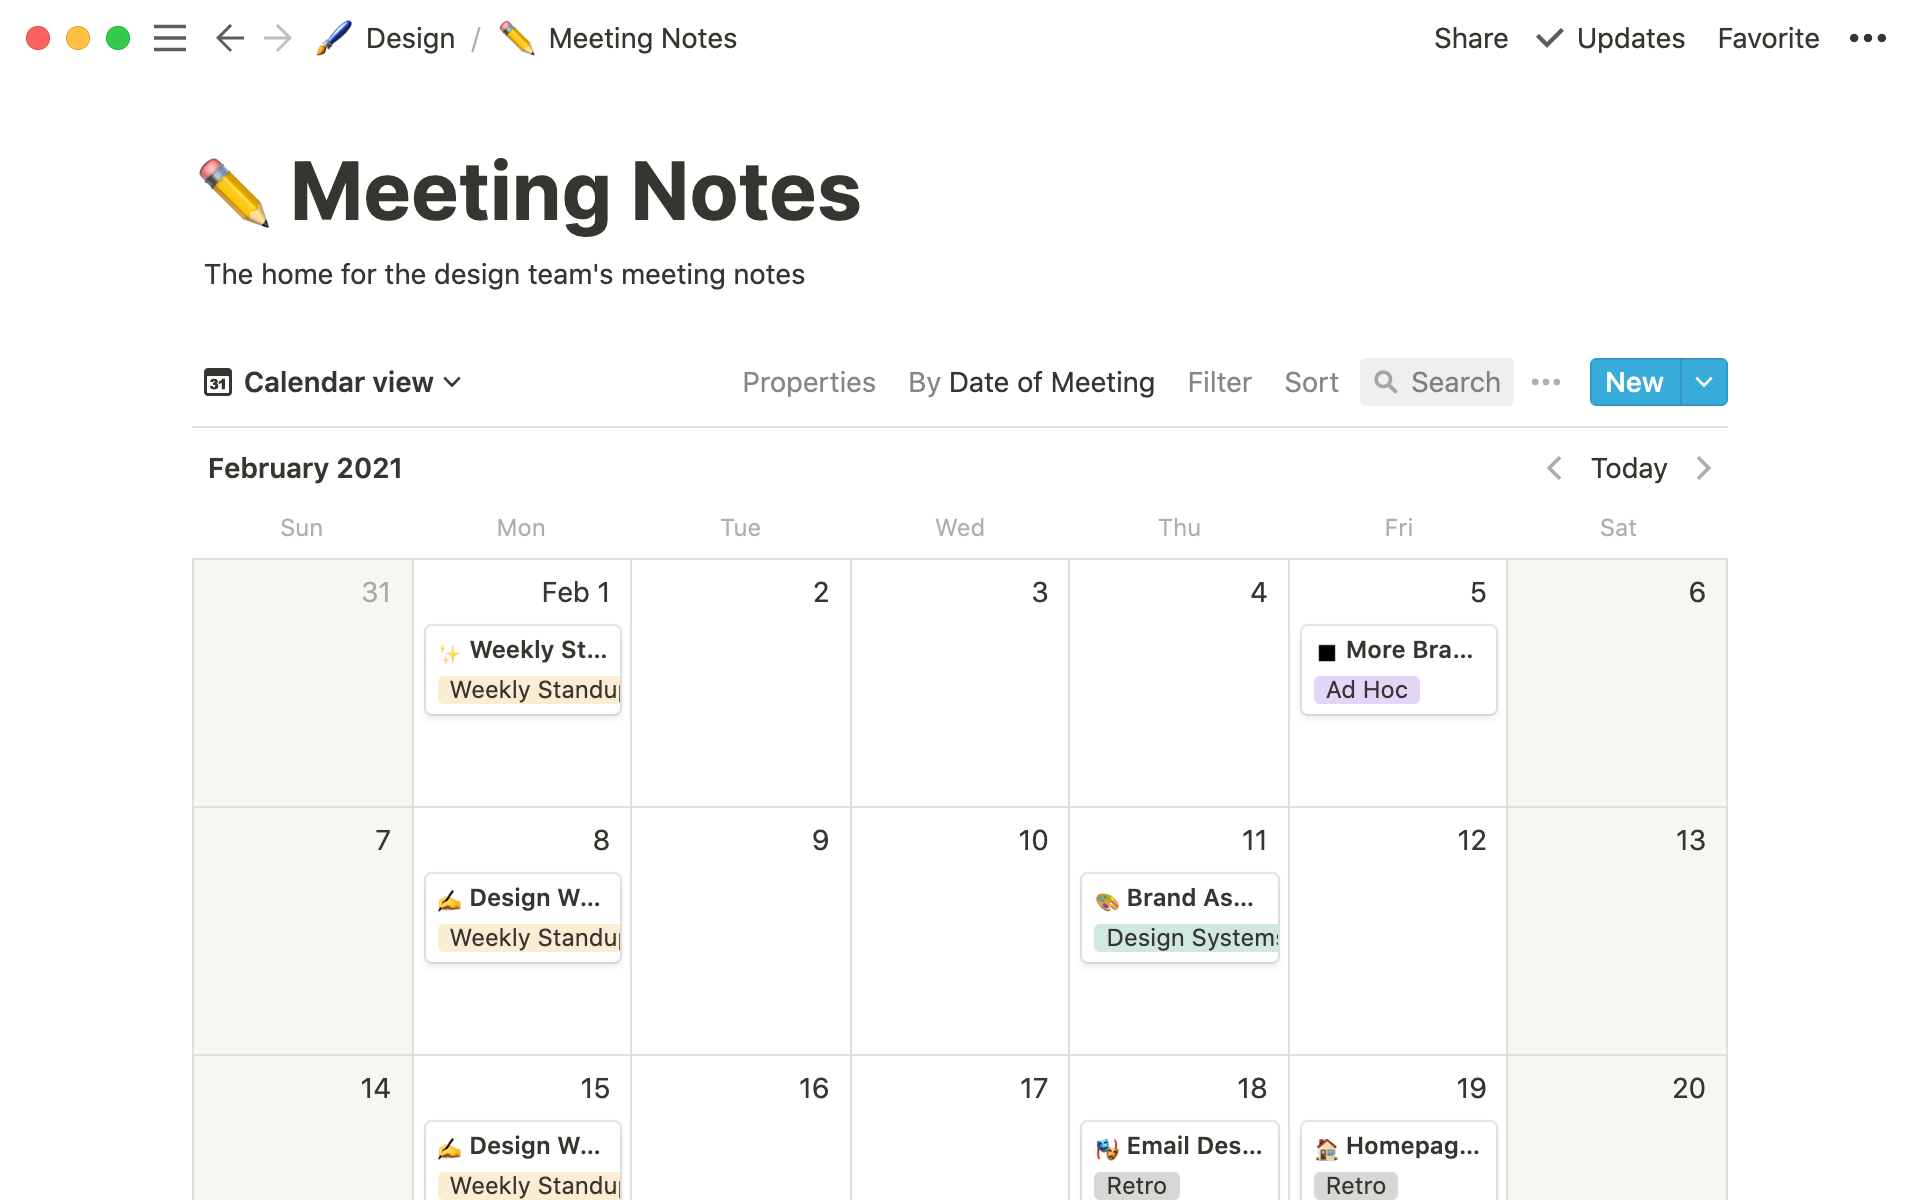 Plan meetings, launches, and more using calendar view.